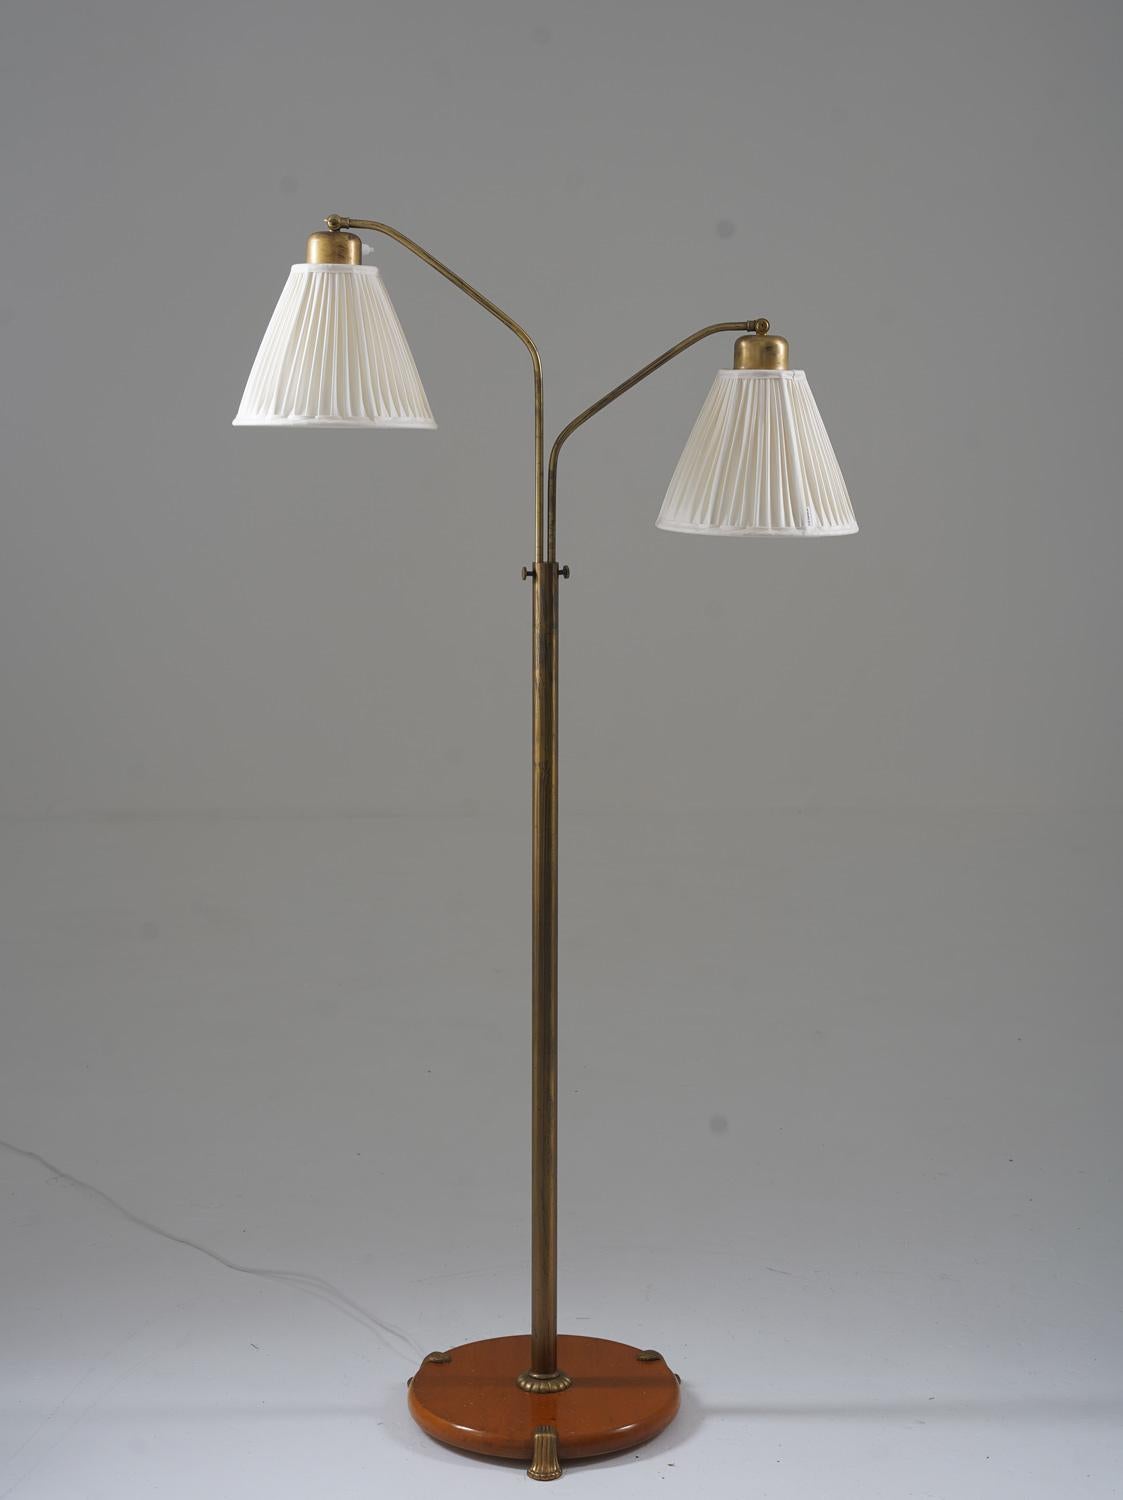 Lovely Swedish Modern floor lamp manufactured in Sweden, 1940s. 
The lamp consists of a wooden base with a brass rod, supporting two swivel arms that hold the shades. 
The height is adjustable between 125-150cm (49-59